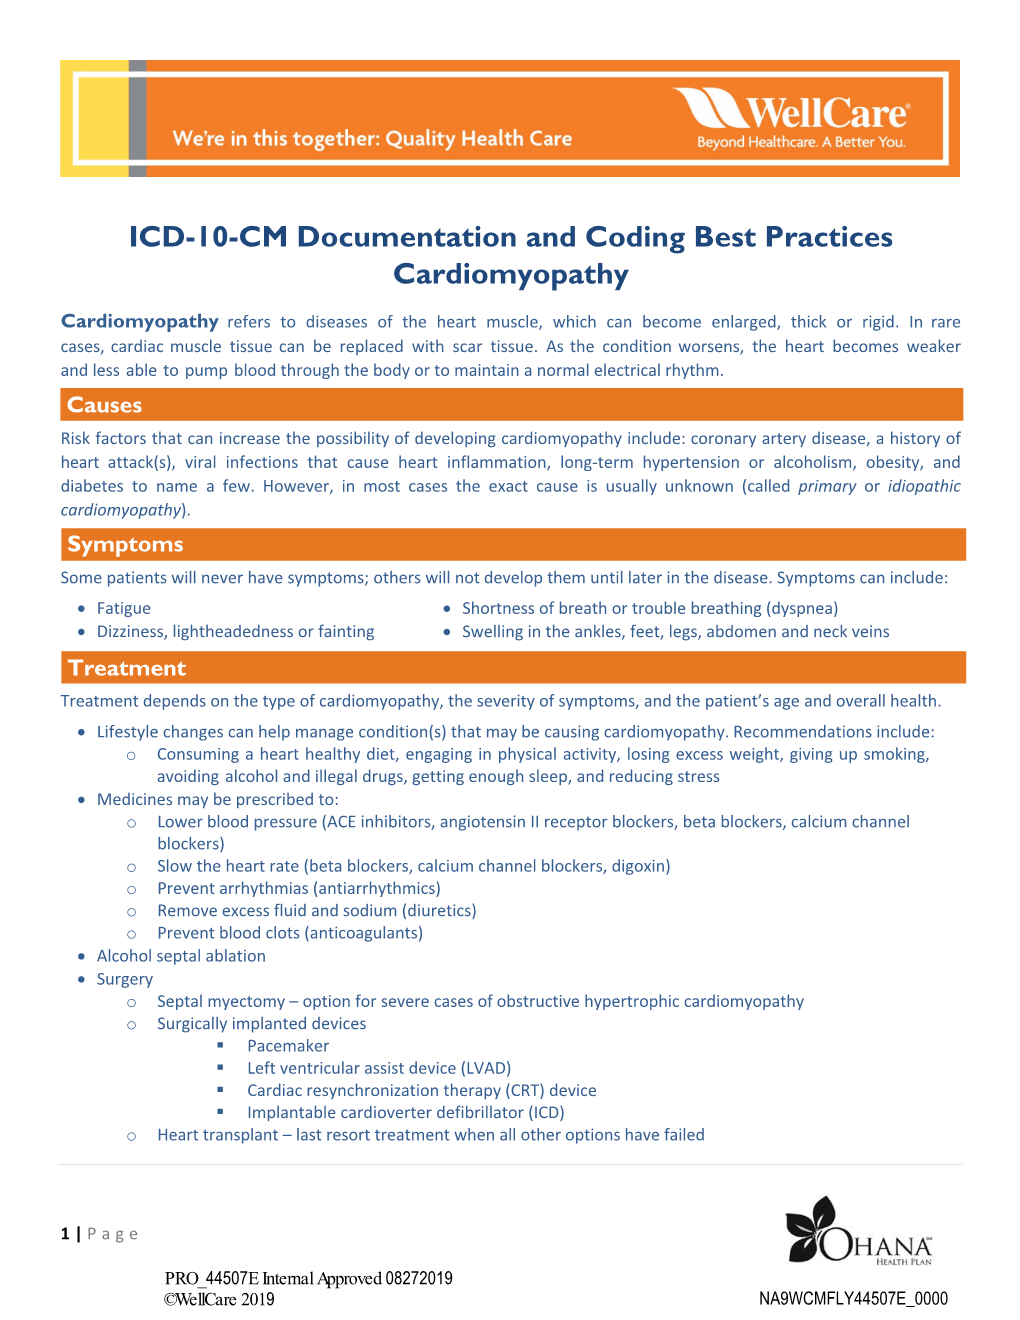 ICD-10-CM Documentation and Coding Best Practices